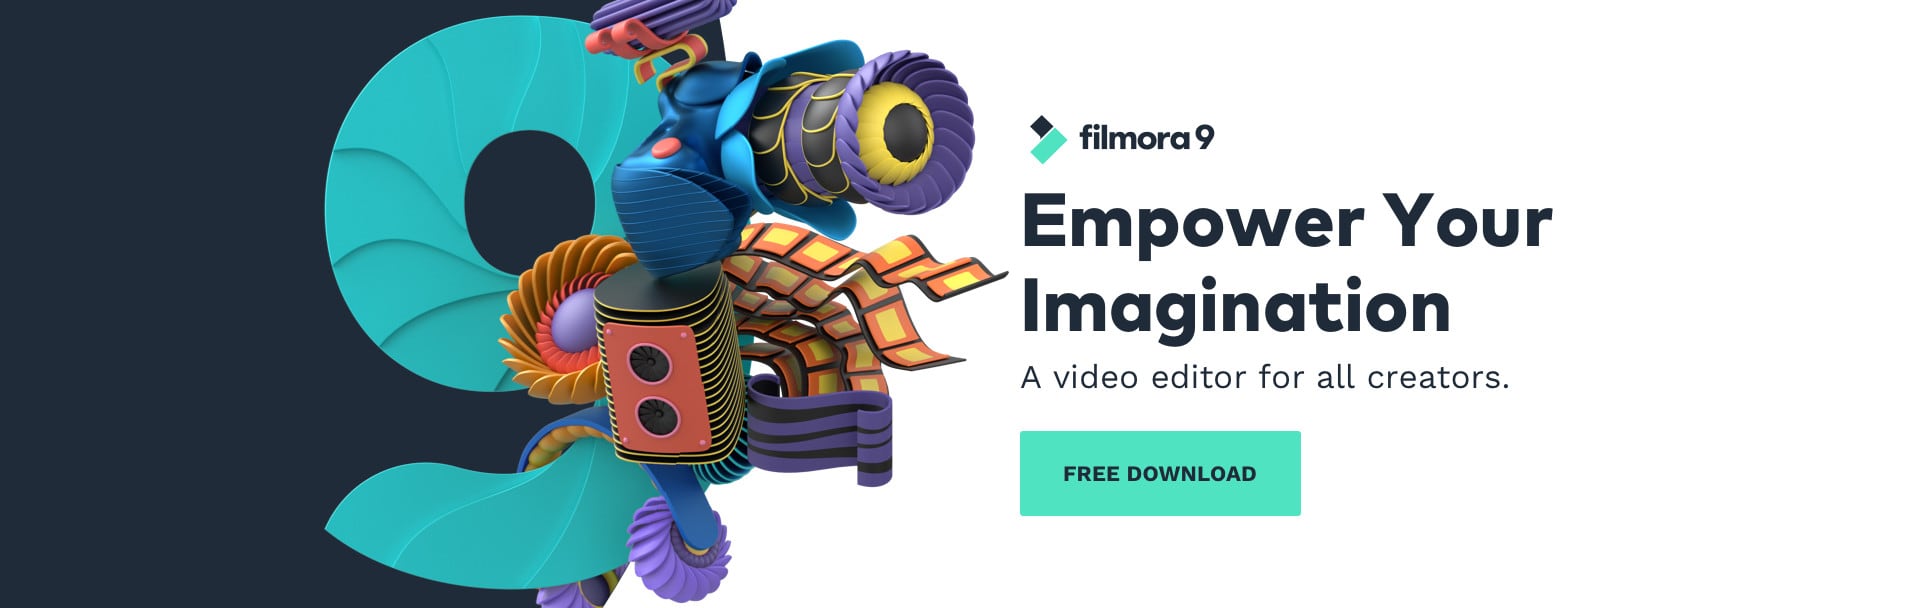 Filmora 9 is a video editor with professional capabilities, aimed at users of all skill levels.